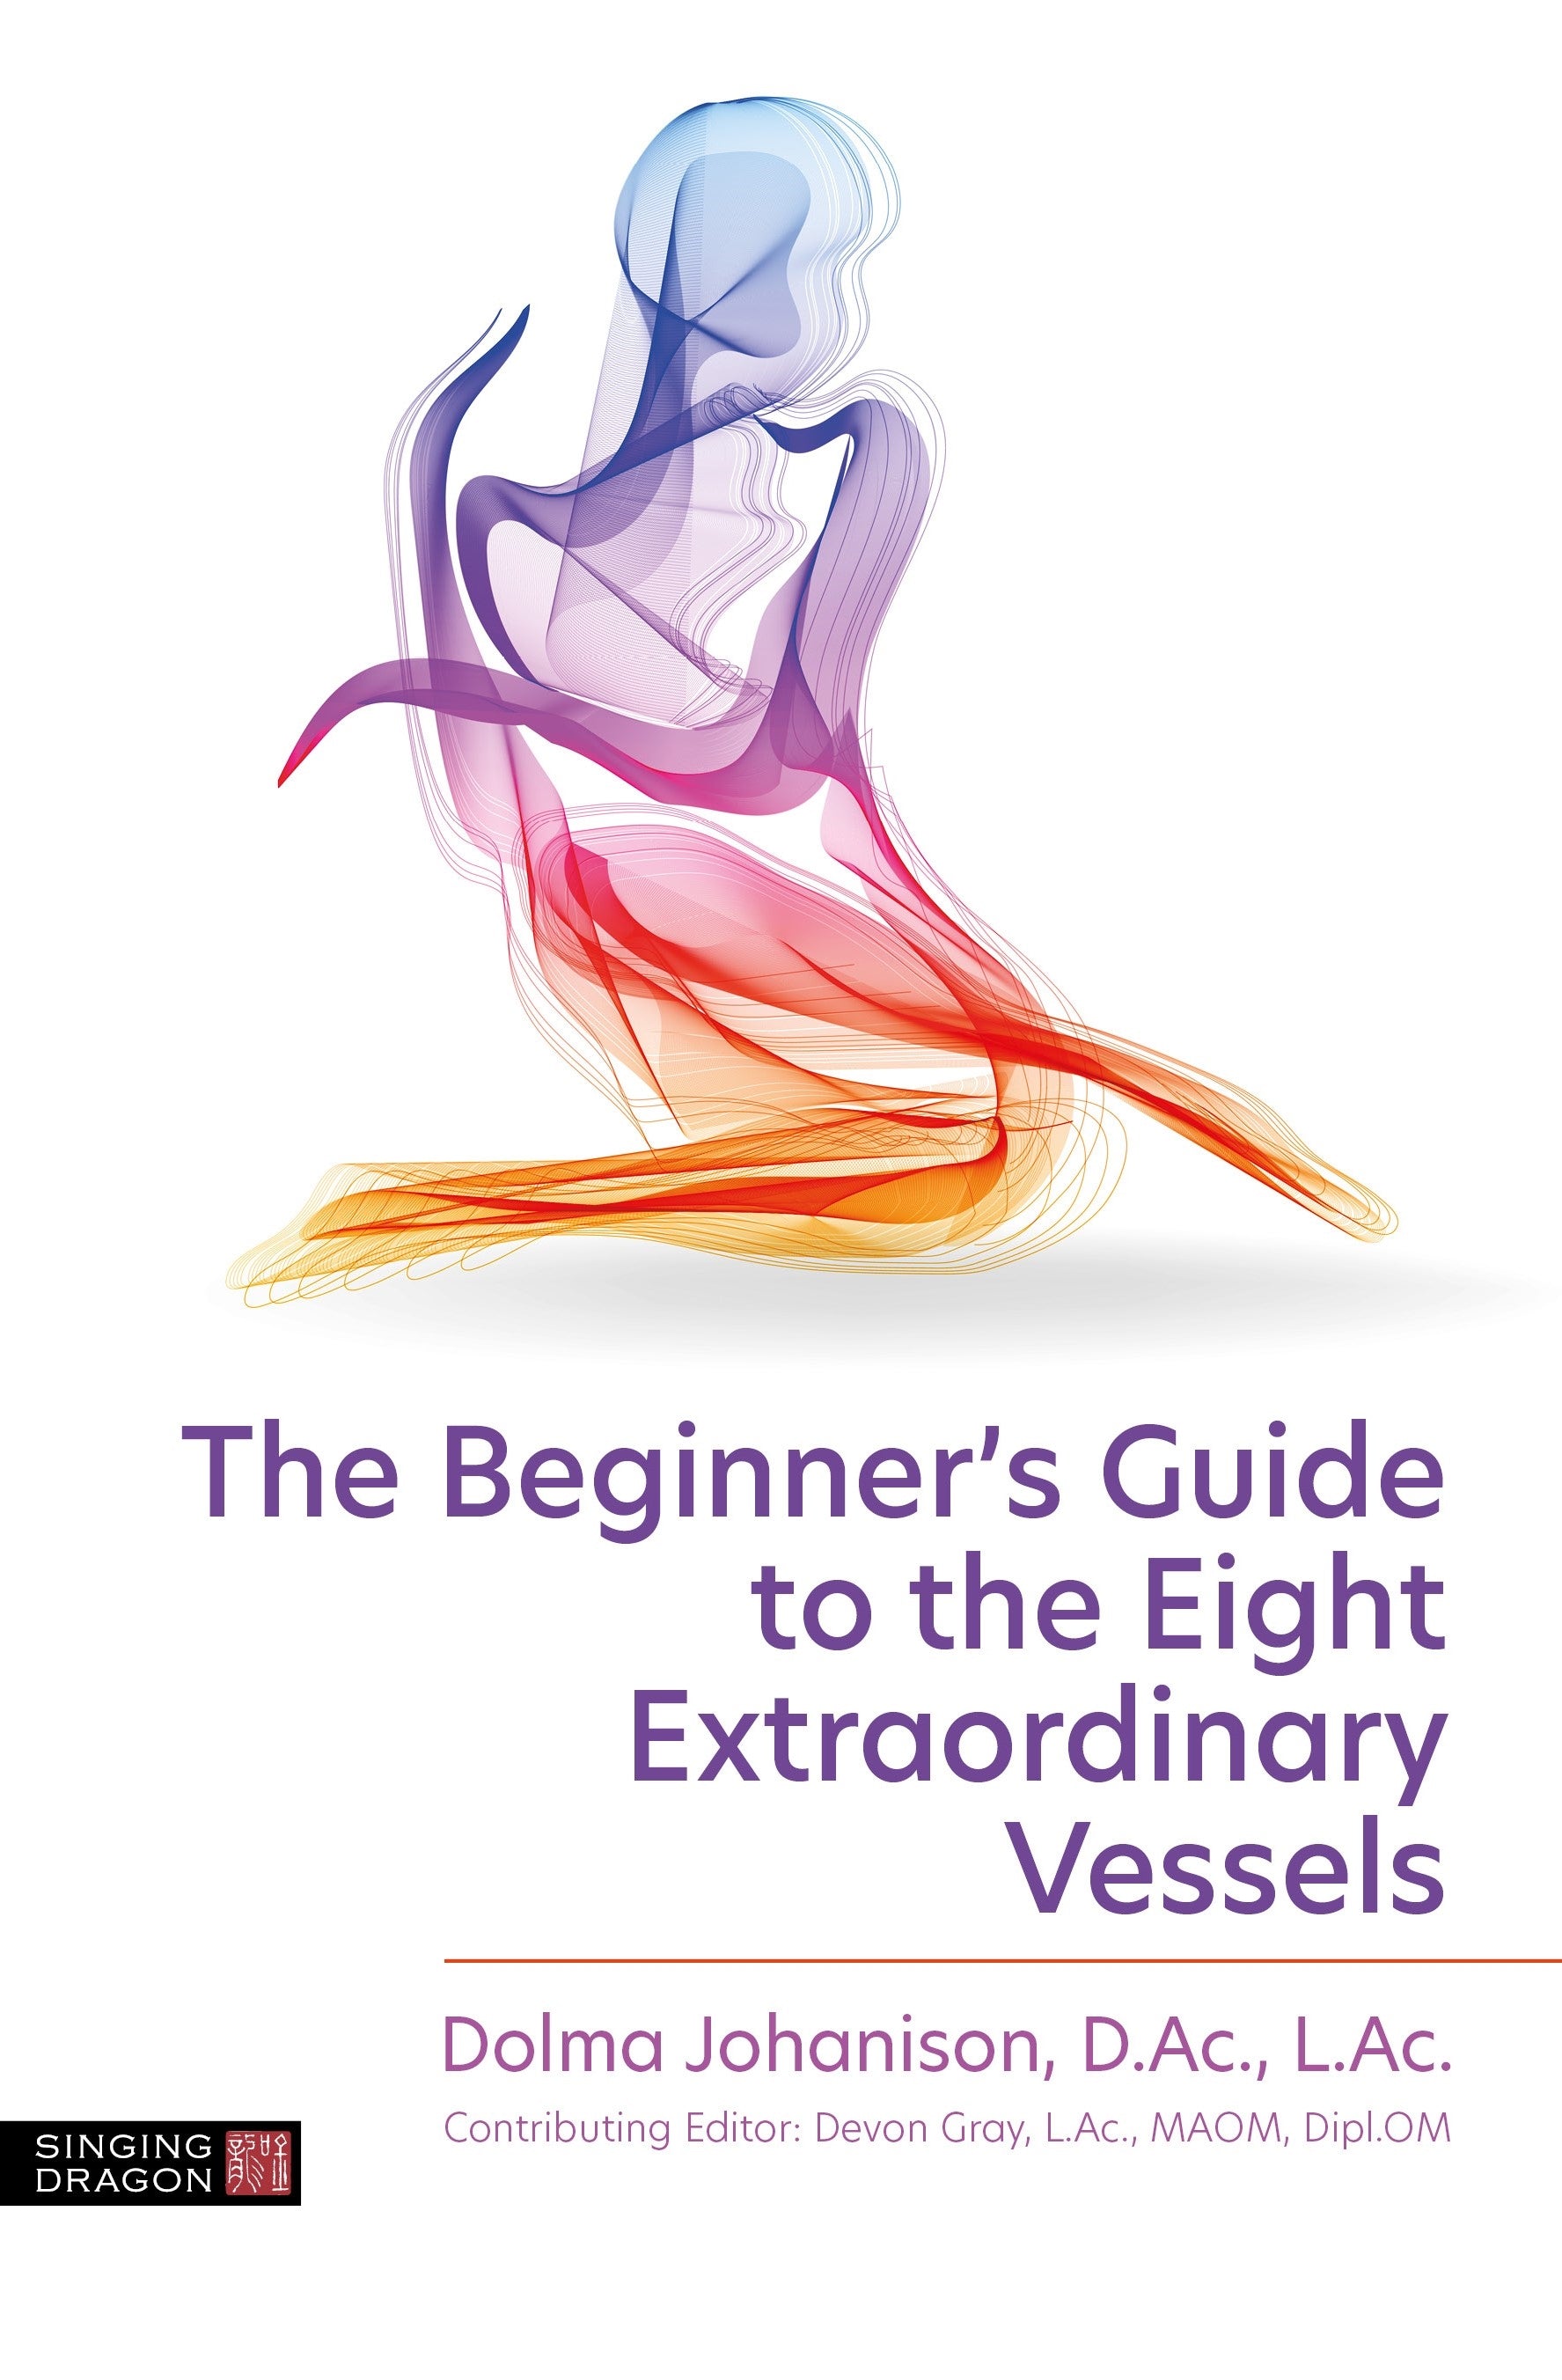 The Beginner's Guide to the Eight Extraordinary Vessels by Dolma Johanison, Mikschal Johanison